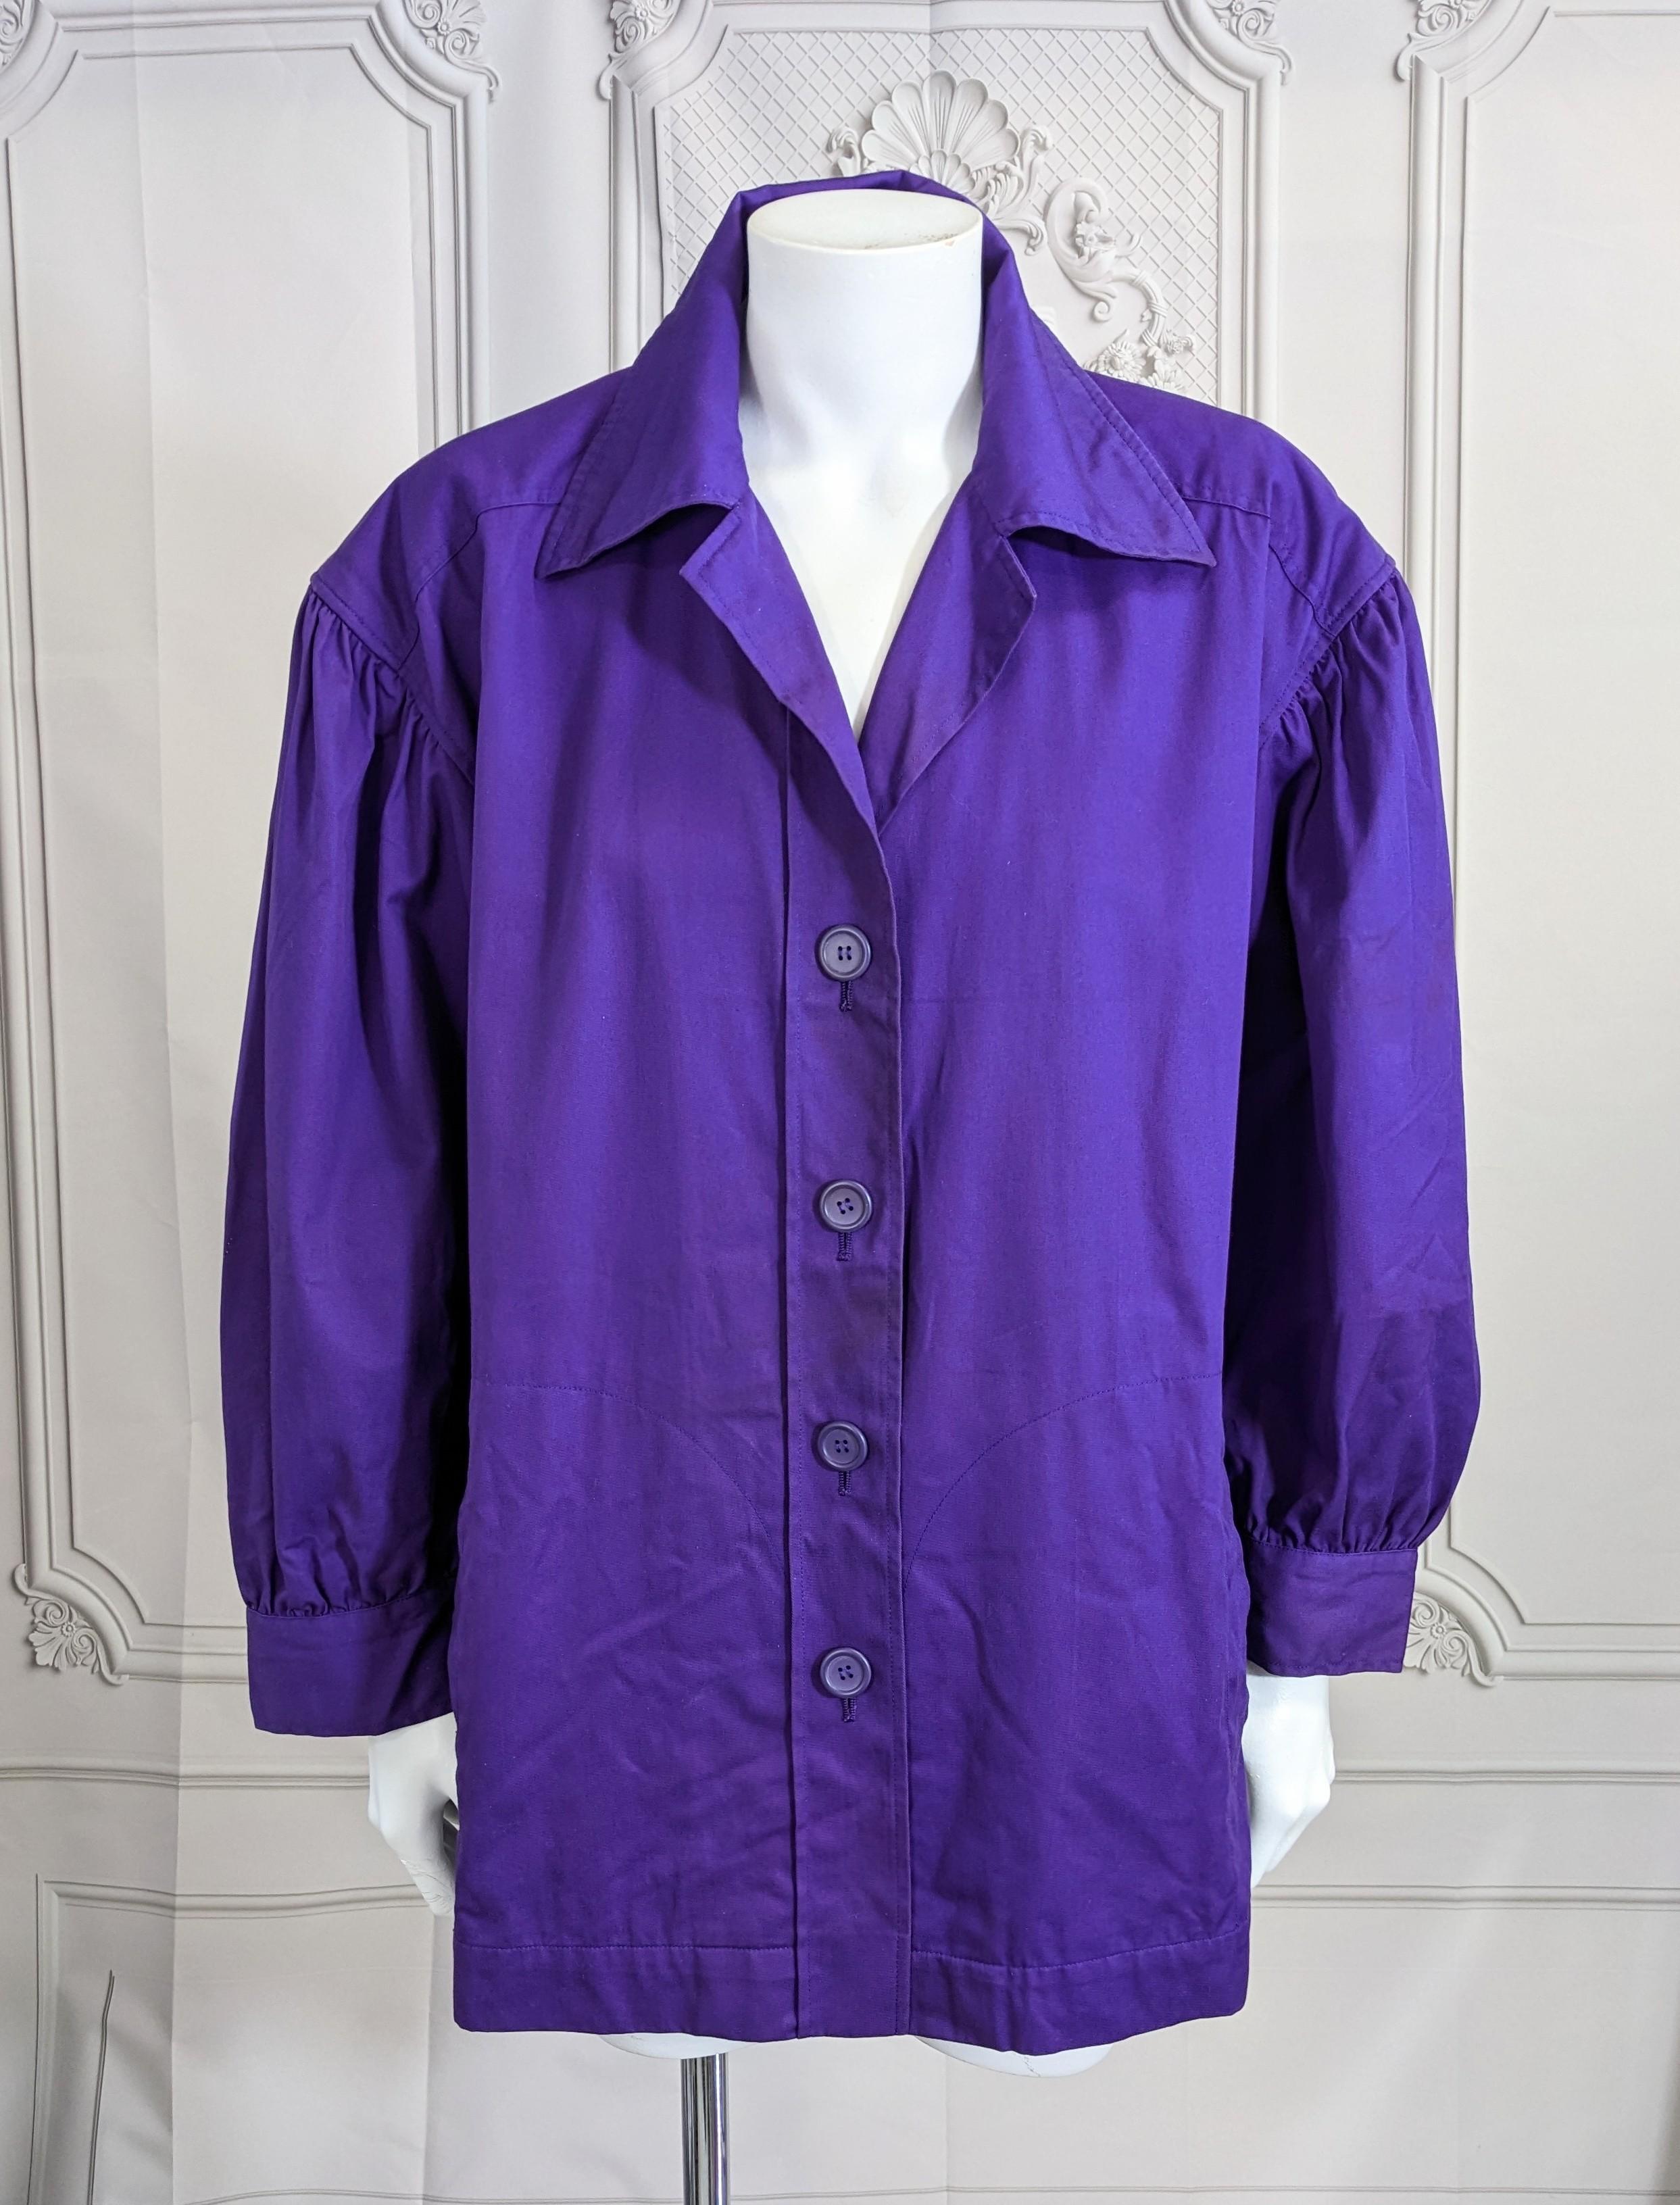 Early Yves Saint Laurent Violet Cotton Twill Jacket from the 1970's. French workwear reimagined by St. Laurent with puffy sleeves, slash pockets and vibrant color. Works well belted as well. Lightweight cotton twill in a vibrant purple-blue. Size 34